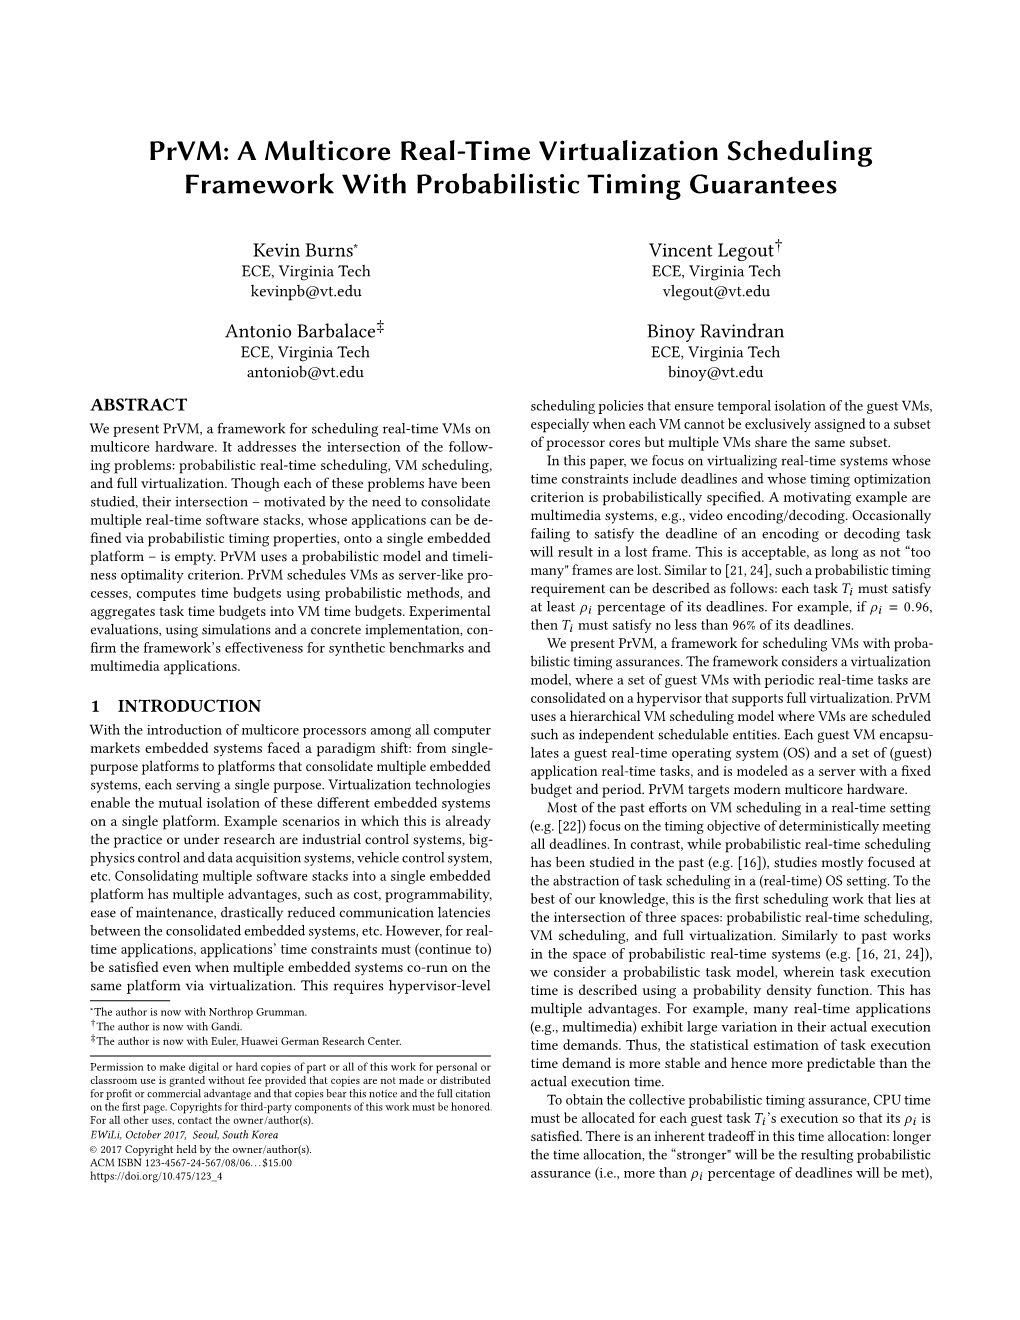 A Multicore Real-Time Virtualization Scheduling Framework with Probabilistic Timing Guarantees